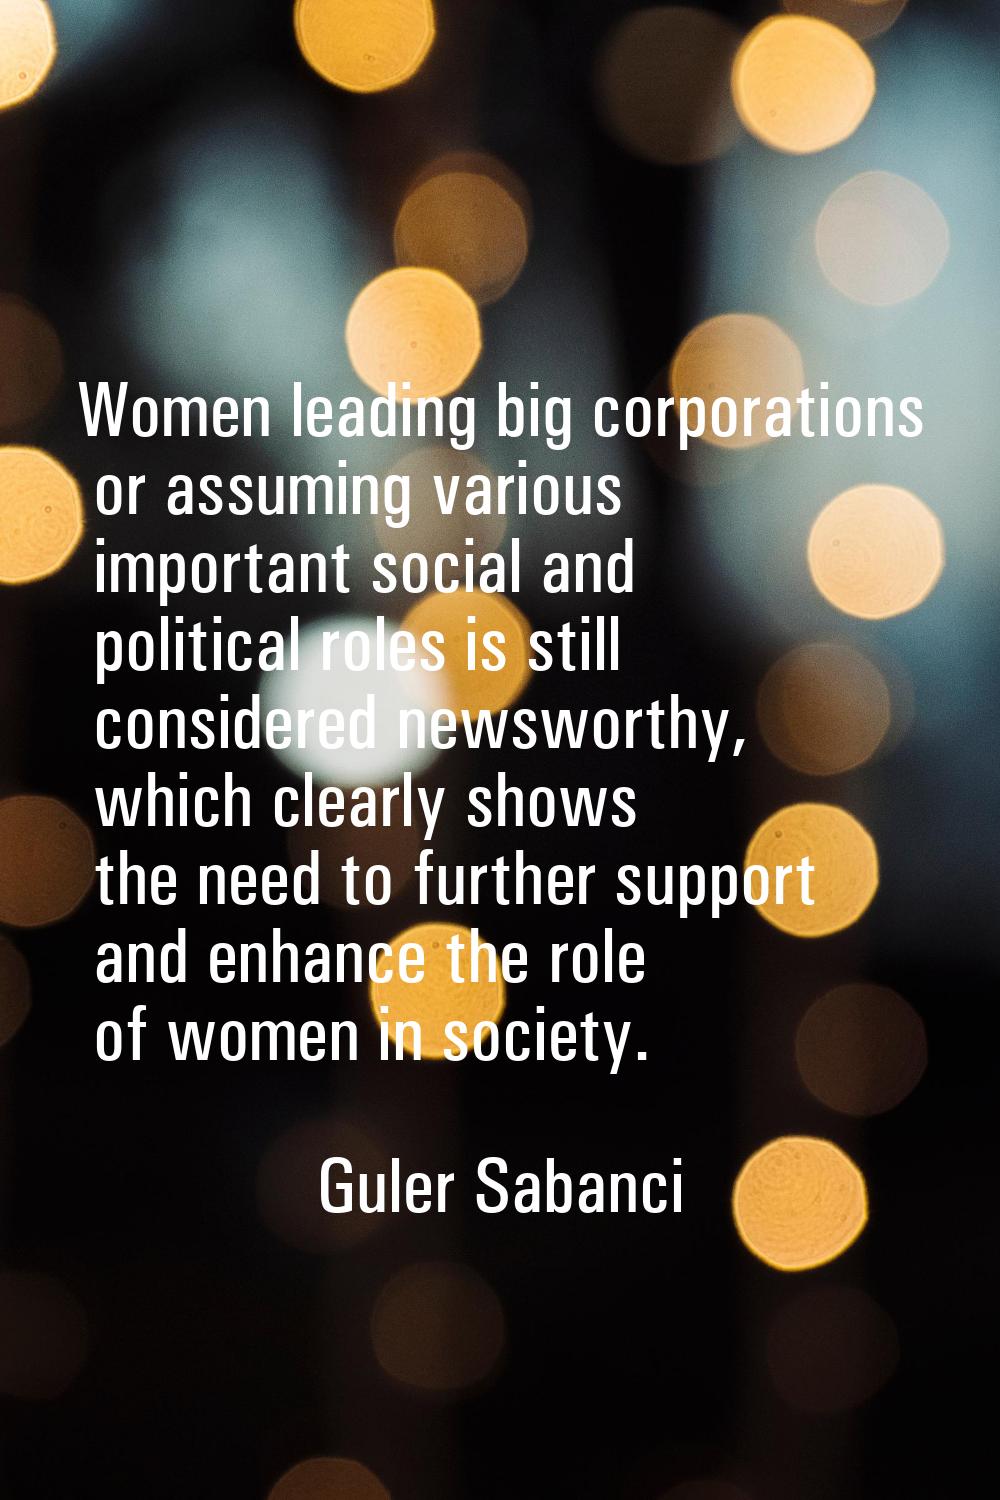 Women leading big corporations or assuming various important social and political roles is still co